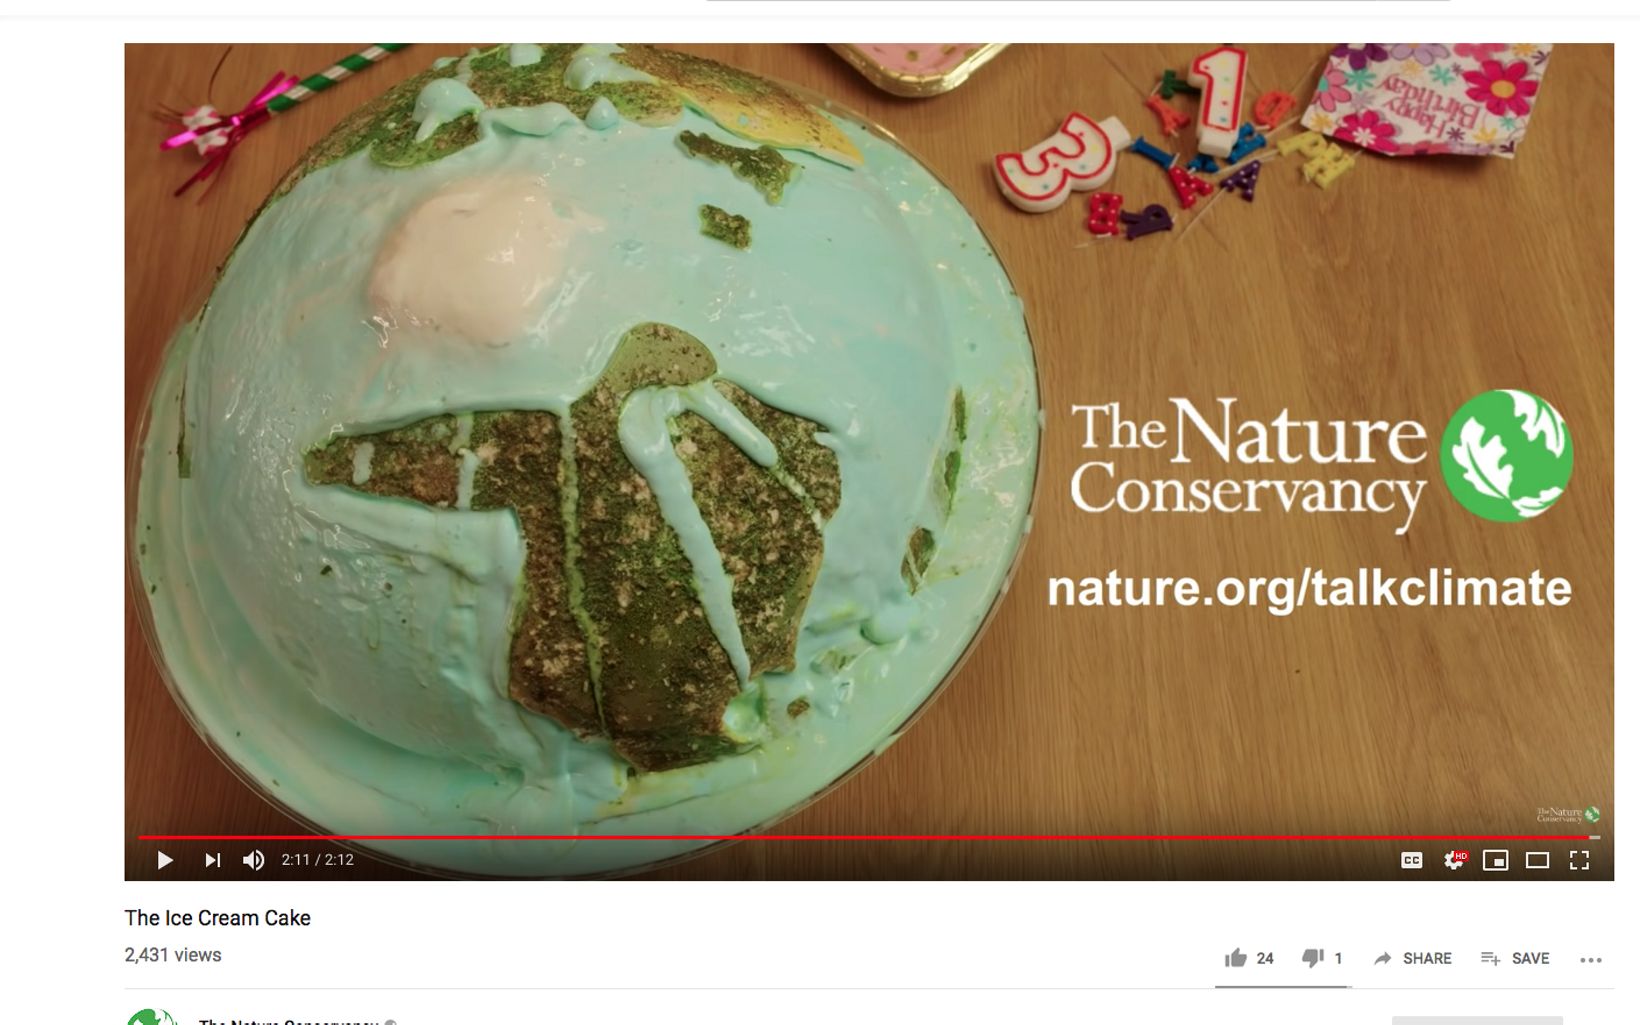 What happens when a Hollywood comedy writer parodies our climate pledge? A hilarious ice cream cake skit that leaves you wanting to take action. Talking about climate change doesn’t have to be difficult. Take our pledge and get useful tips: https://www.nature.org/talkclimate